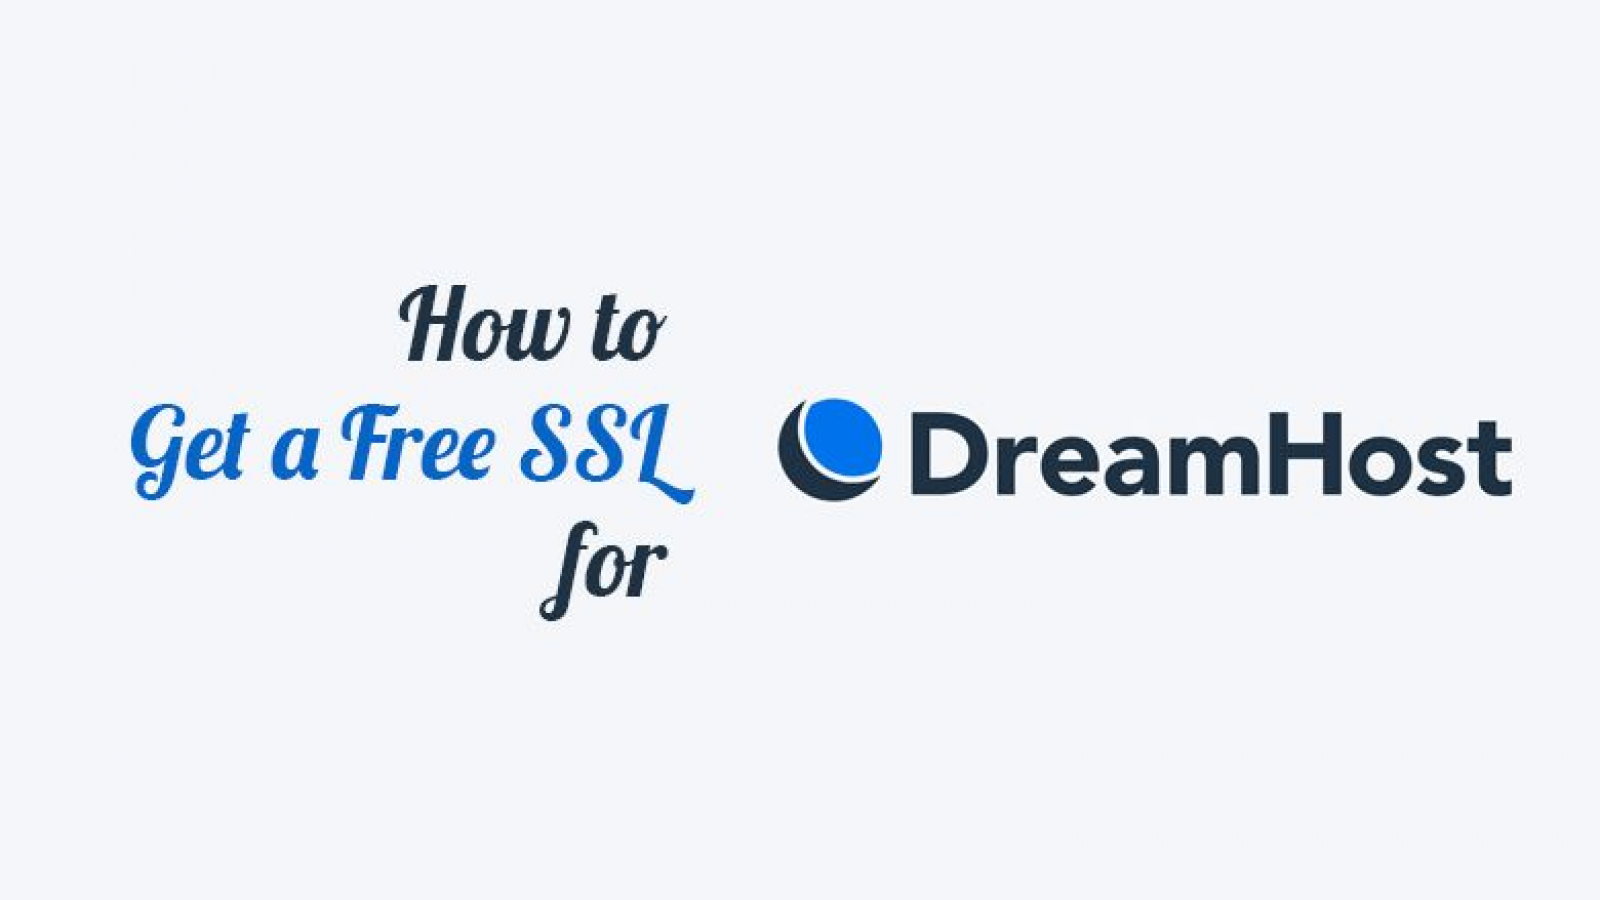 how-to-get-a-free-ssl-from-dreamhost-featured-compressed